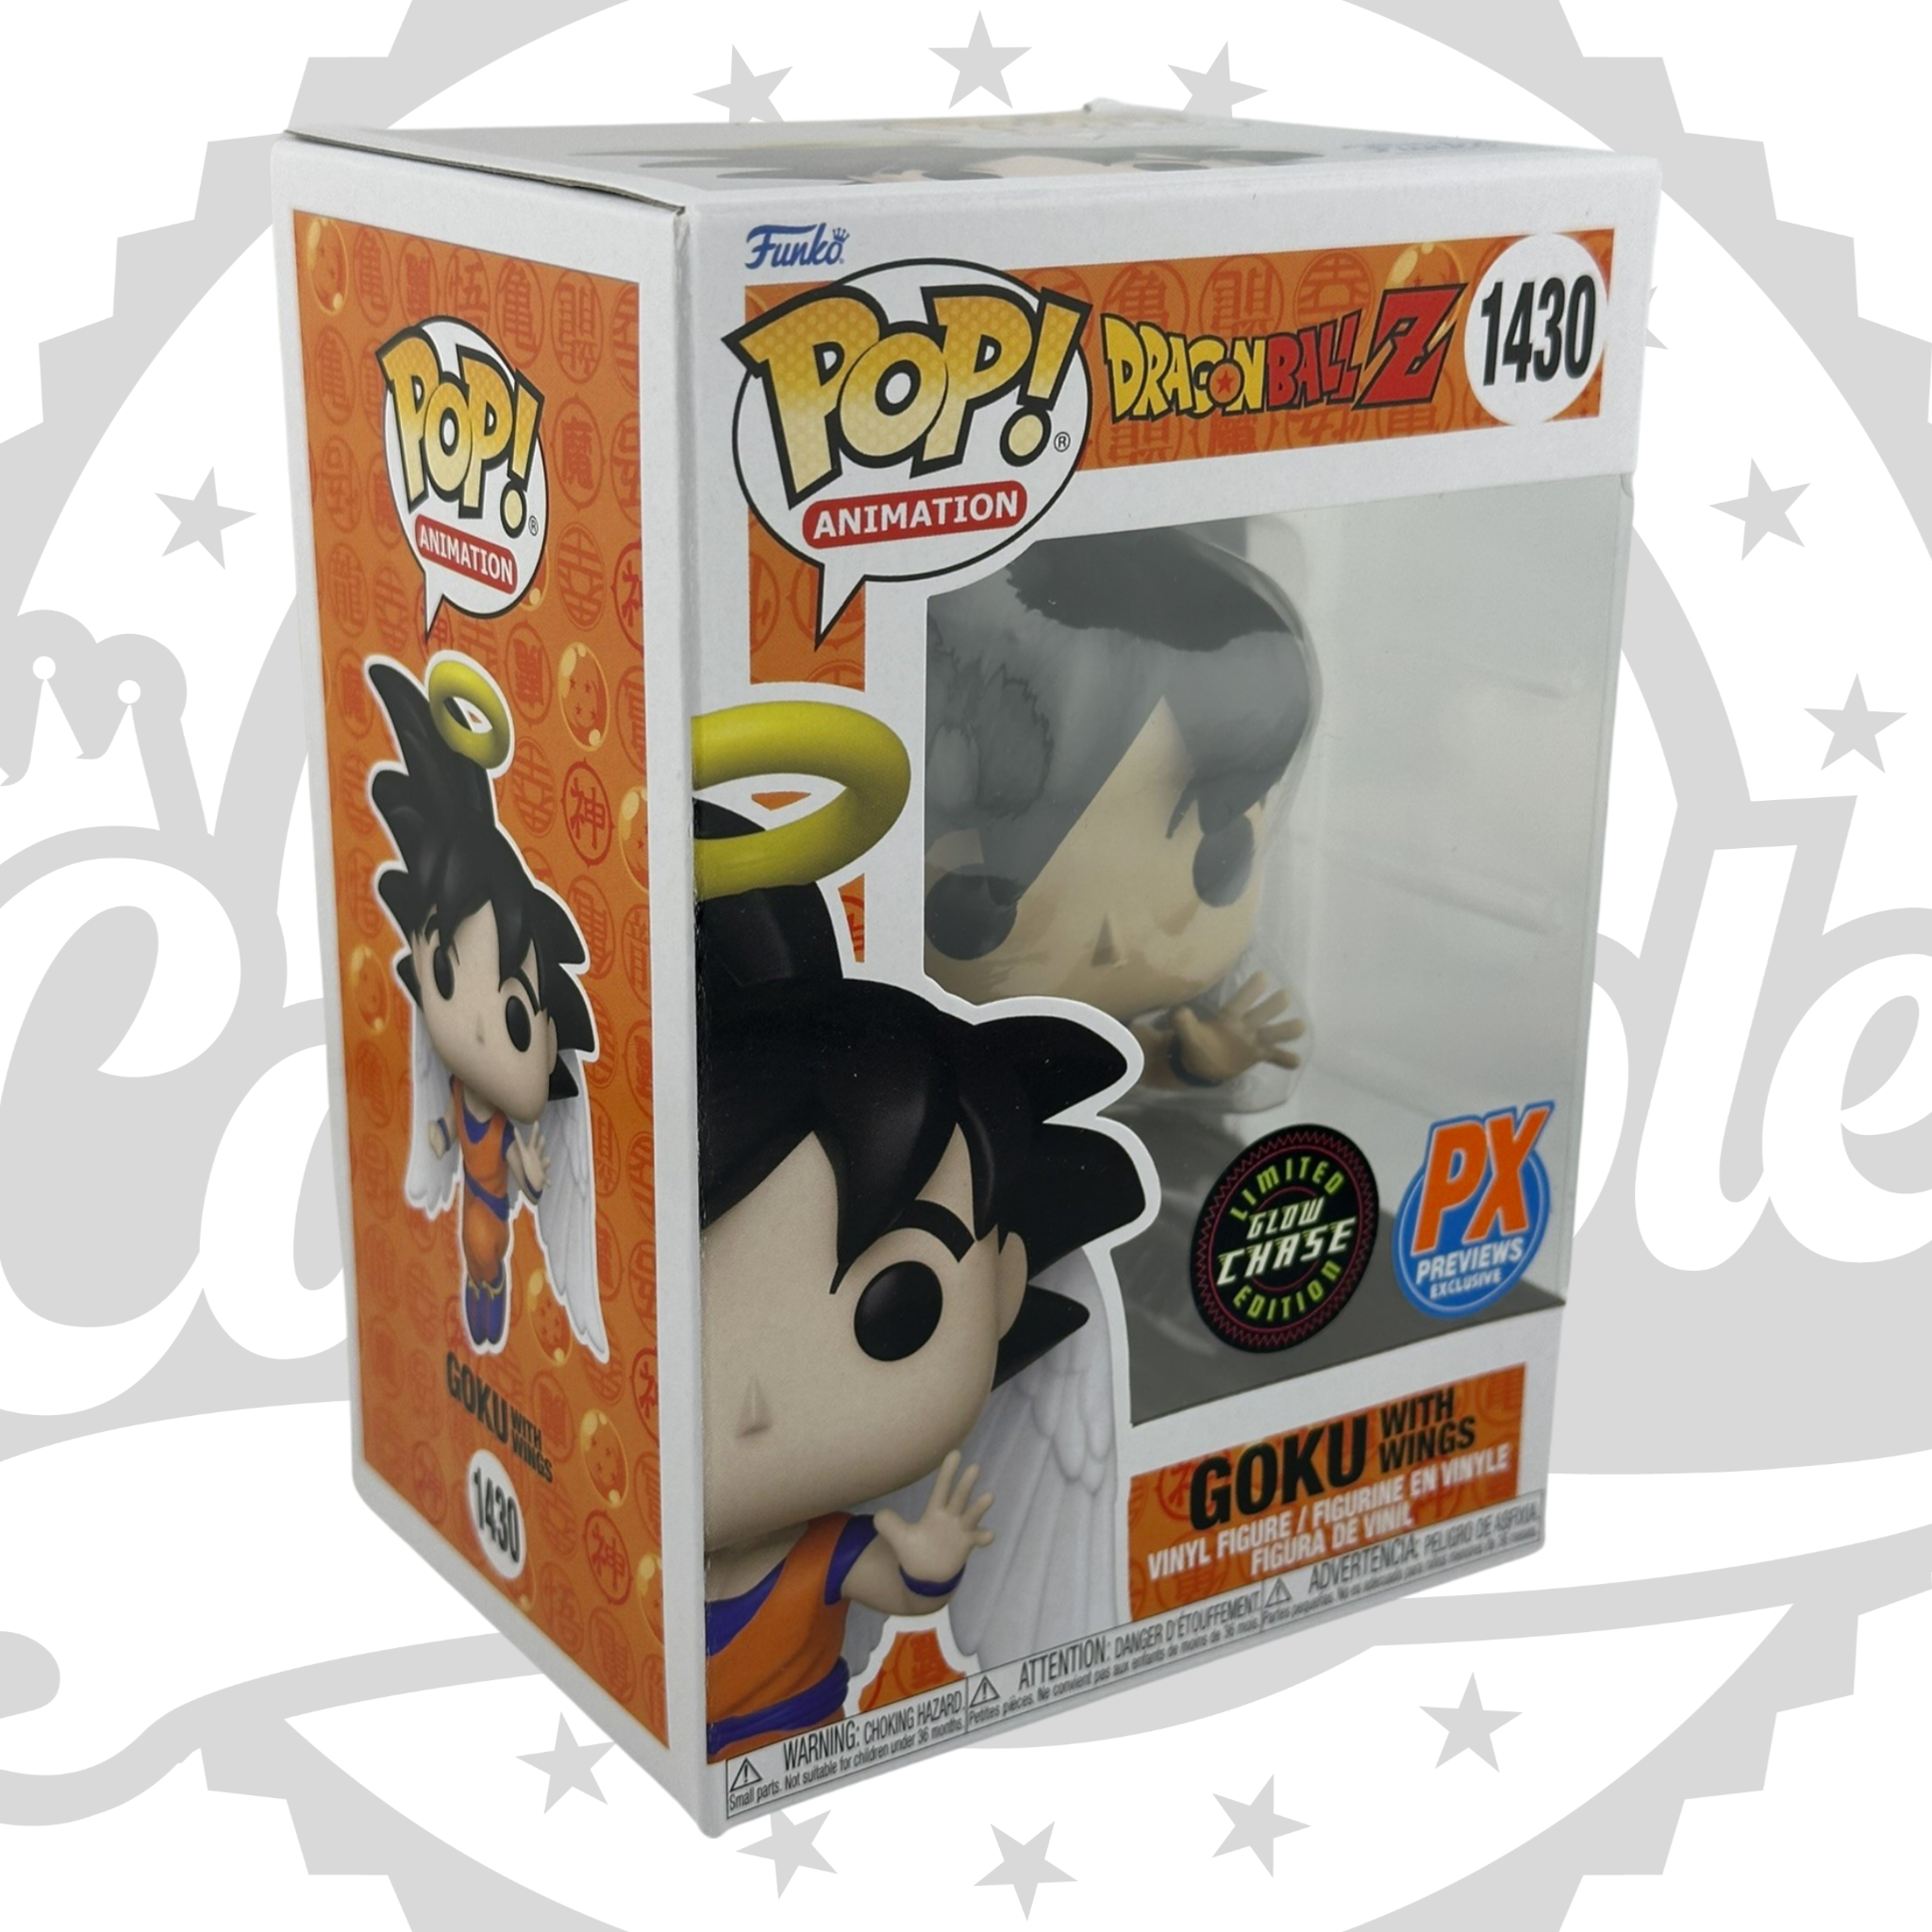 Funko POP! Dragon Ball Z - Goku with Wings Figure #1430 Preview Exclus